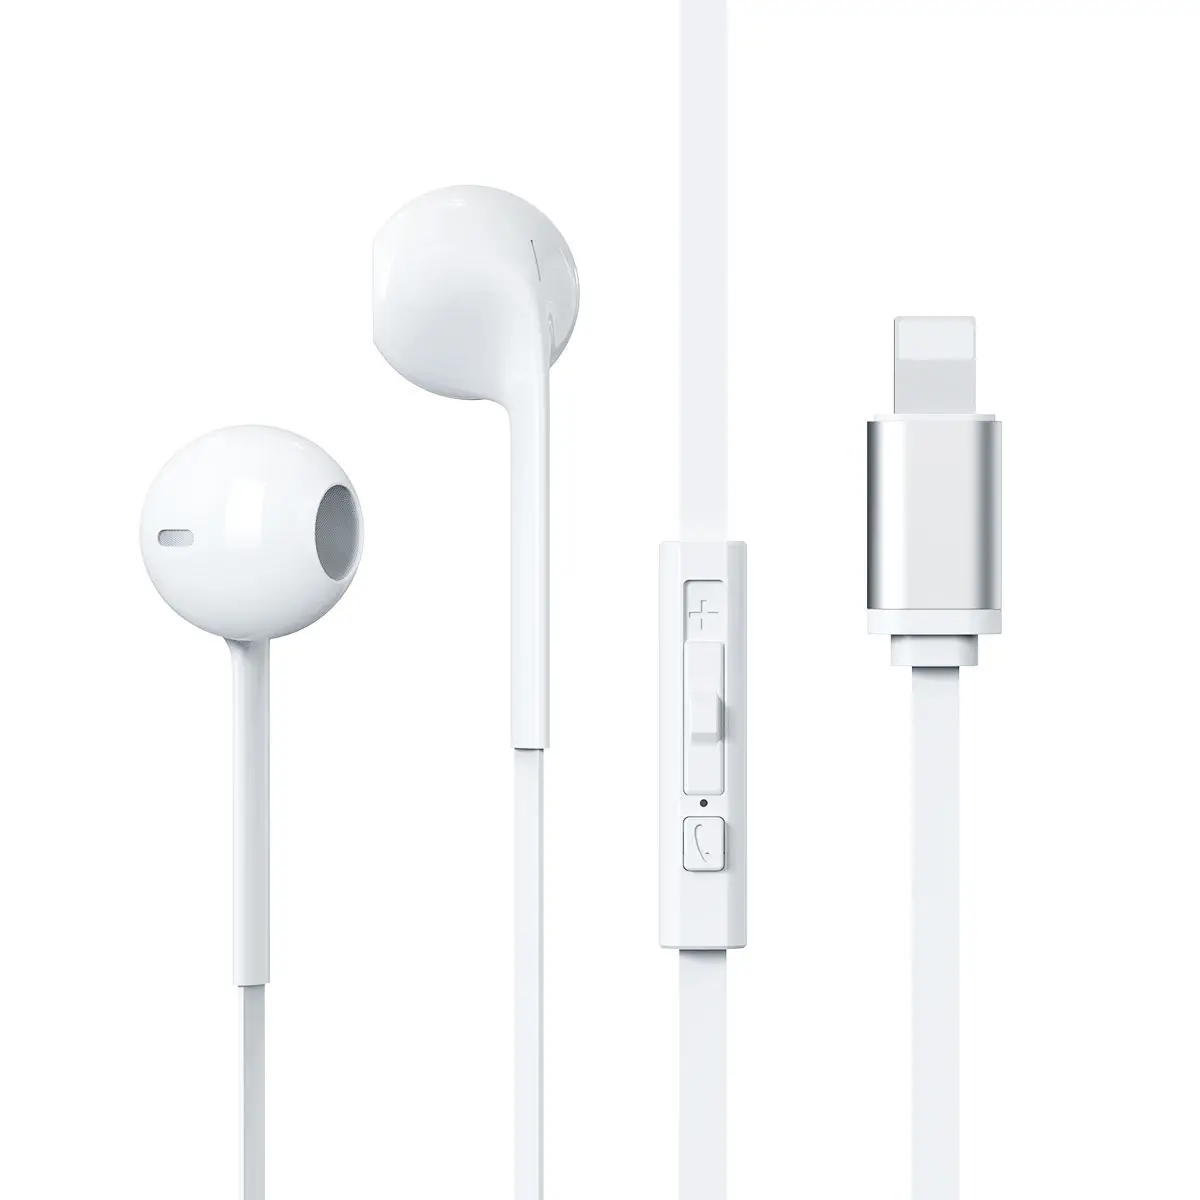 New Arrivals Stereo Lightning Earphone with Mic Wired Handfree Headphone IOS Plug for Iphone